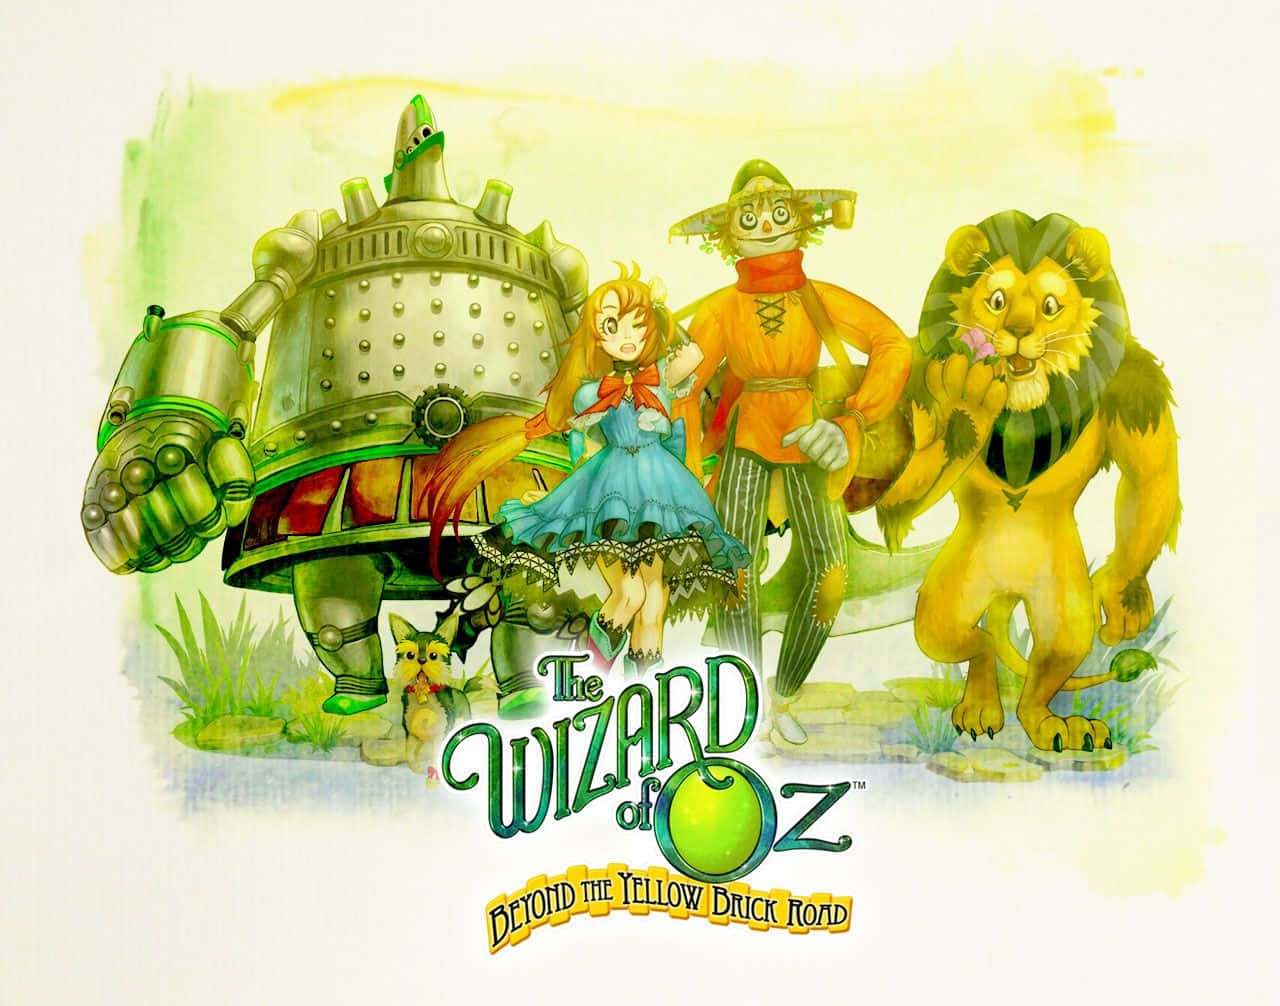 Follow the Yellow Brick Road with Dorothy and her friends in The Wizard of Oz! Wallpaper